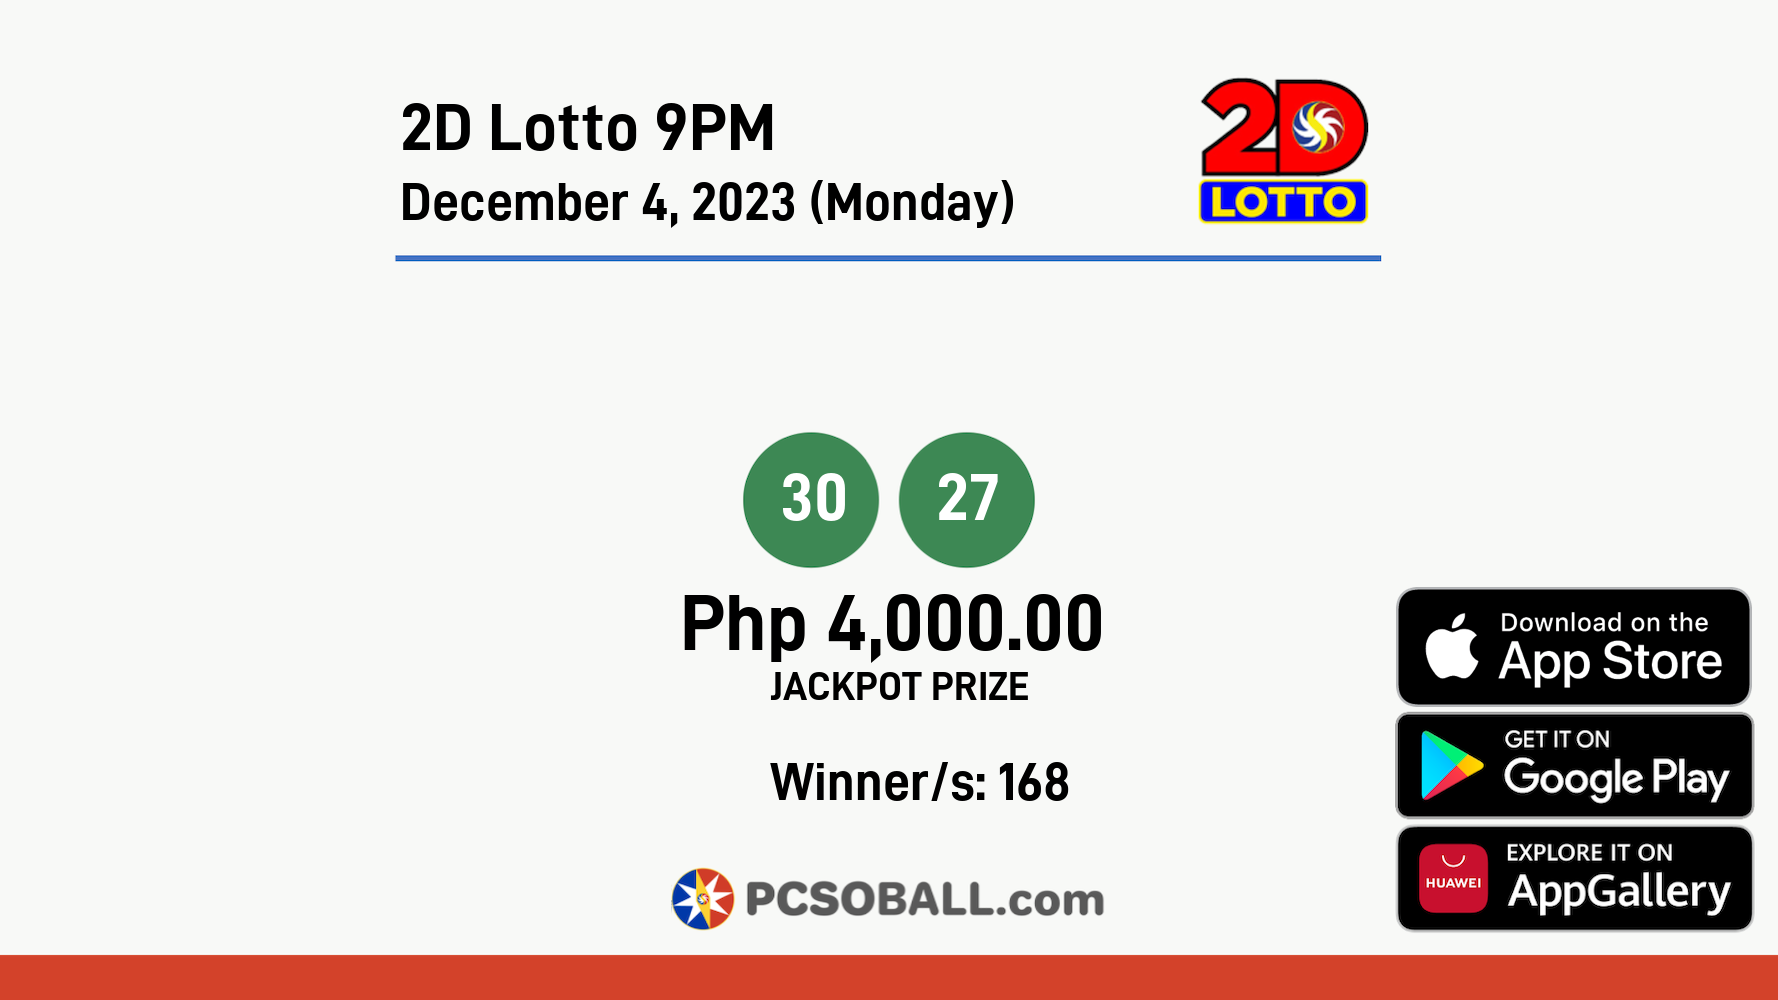 2D Lotto 9PM December 4, 2023 (Monday) Result